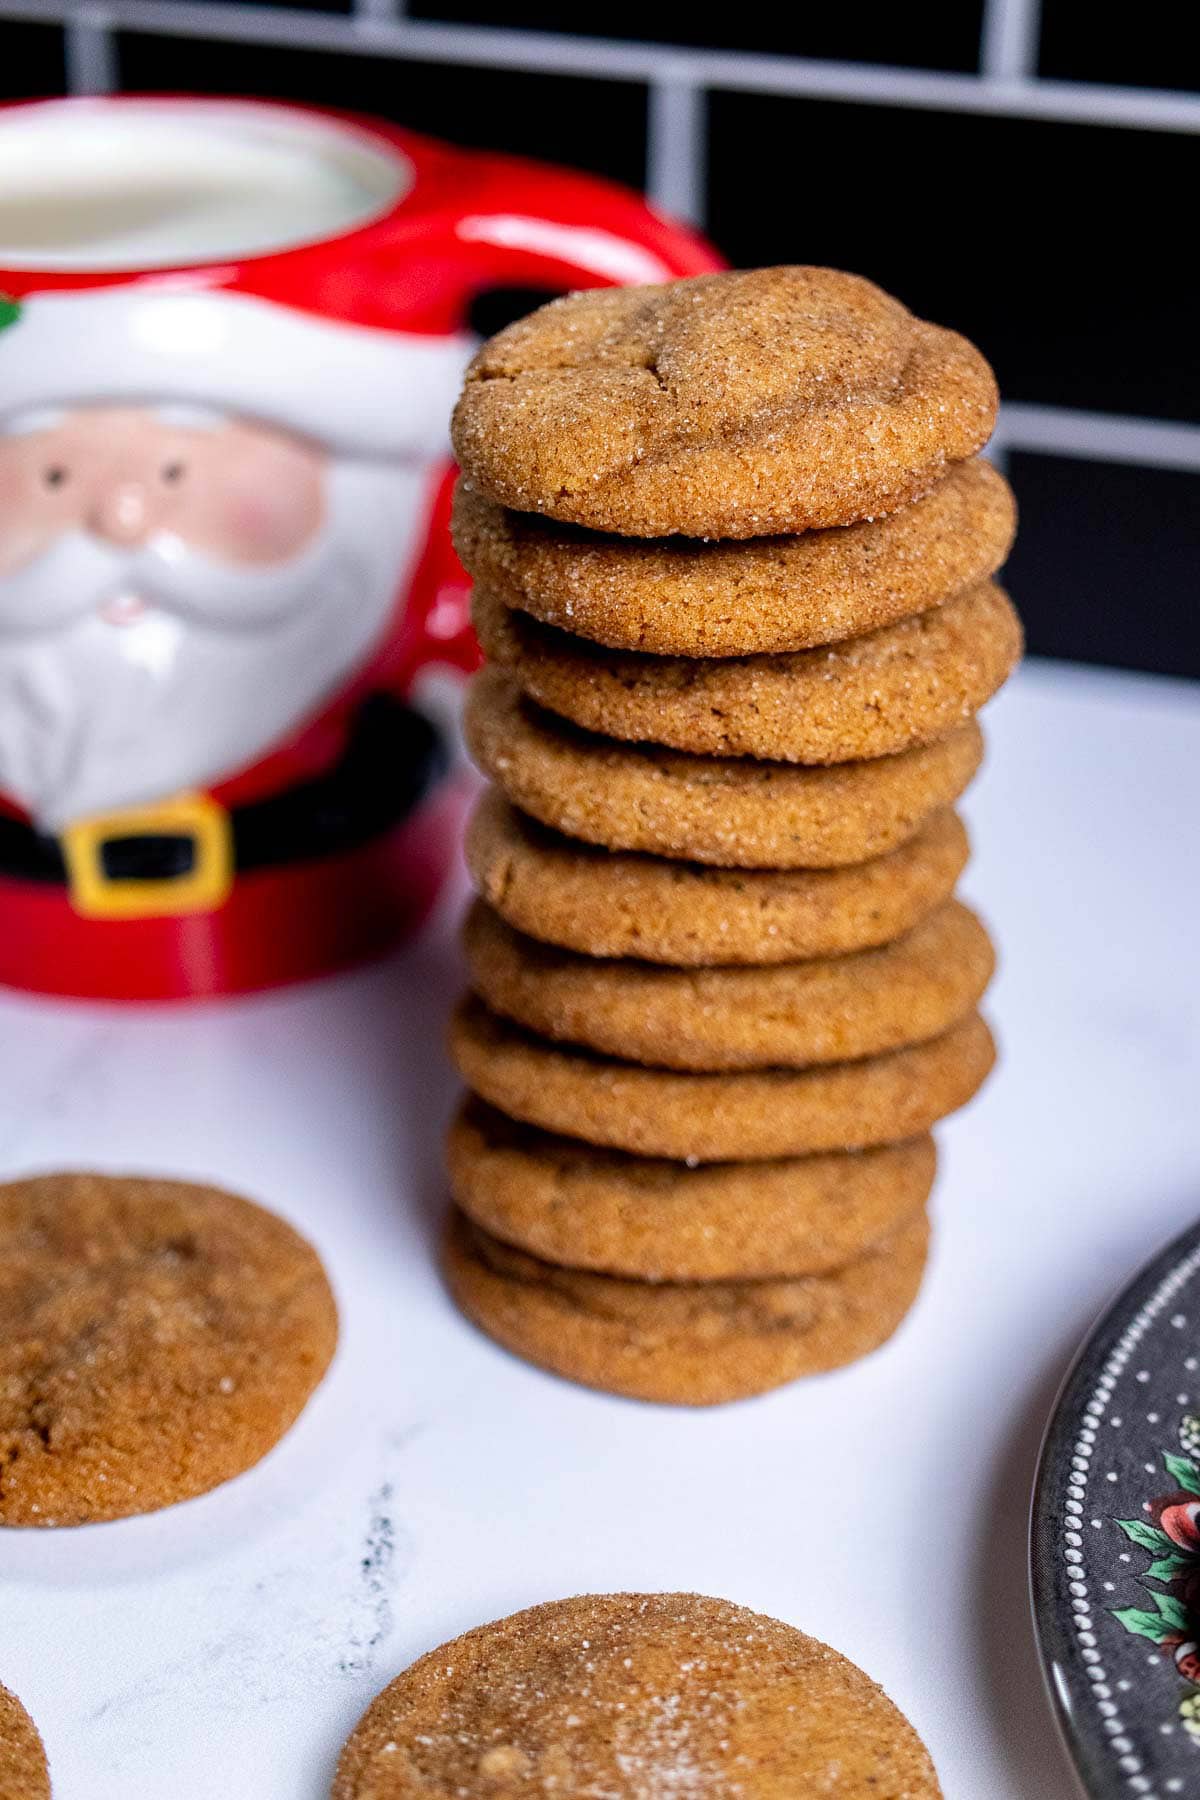 A stack of gingerbread snickerdoodles next to a Santa mug with milk in it.